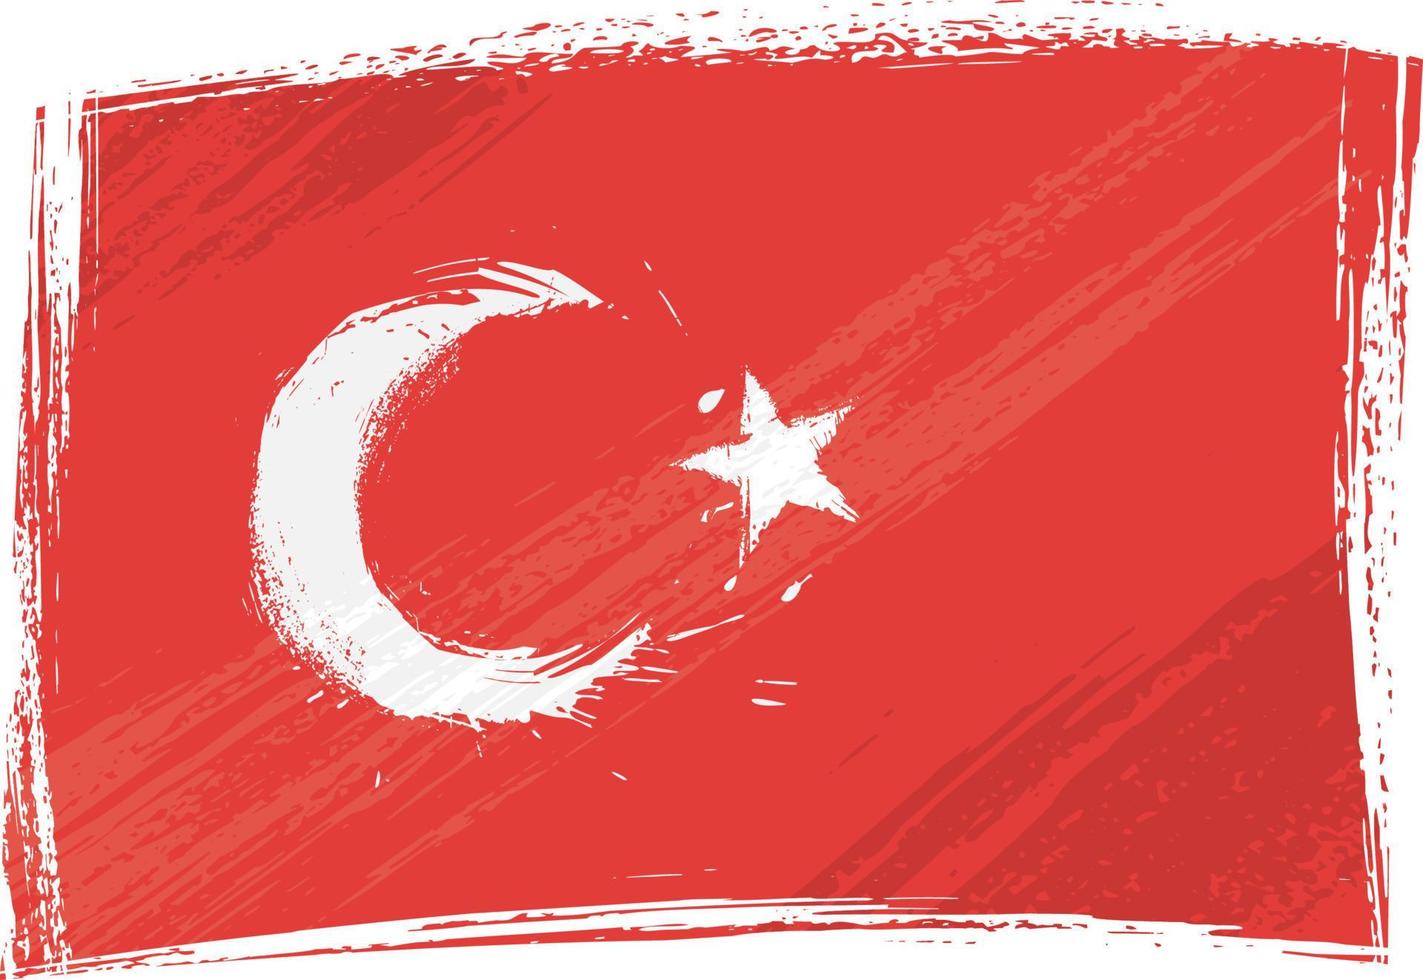 Turkey national flag created in grunge style vector